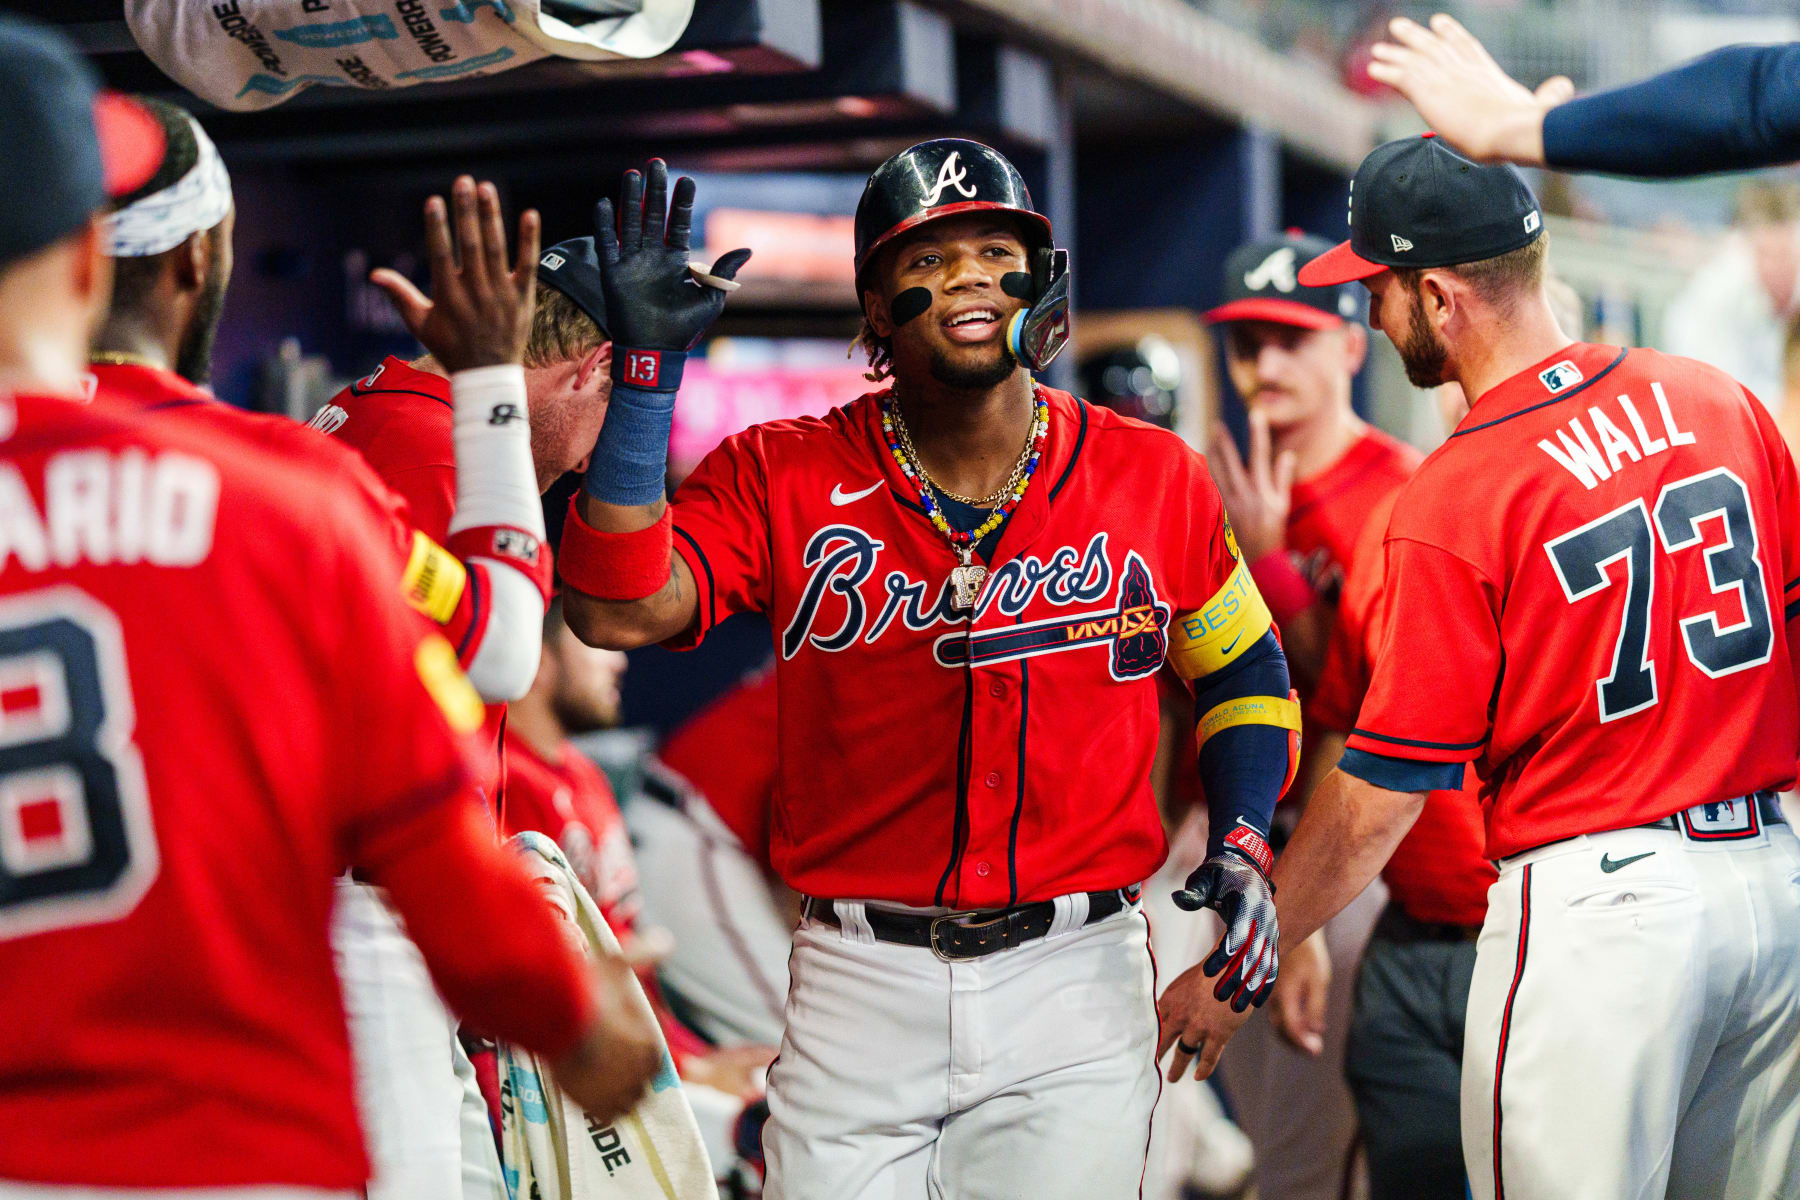 Takeaways from Atlanta's series-opening 9-3 win over the Red Sox